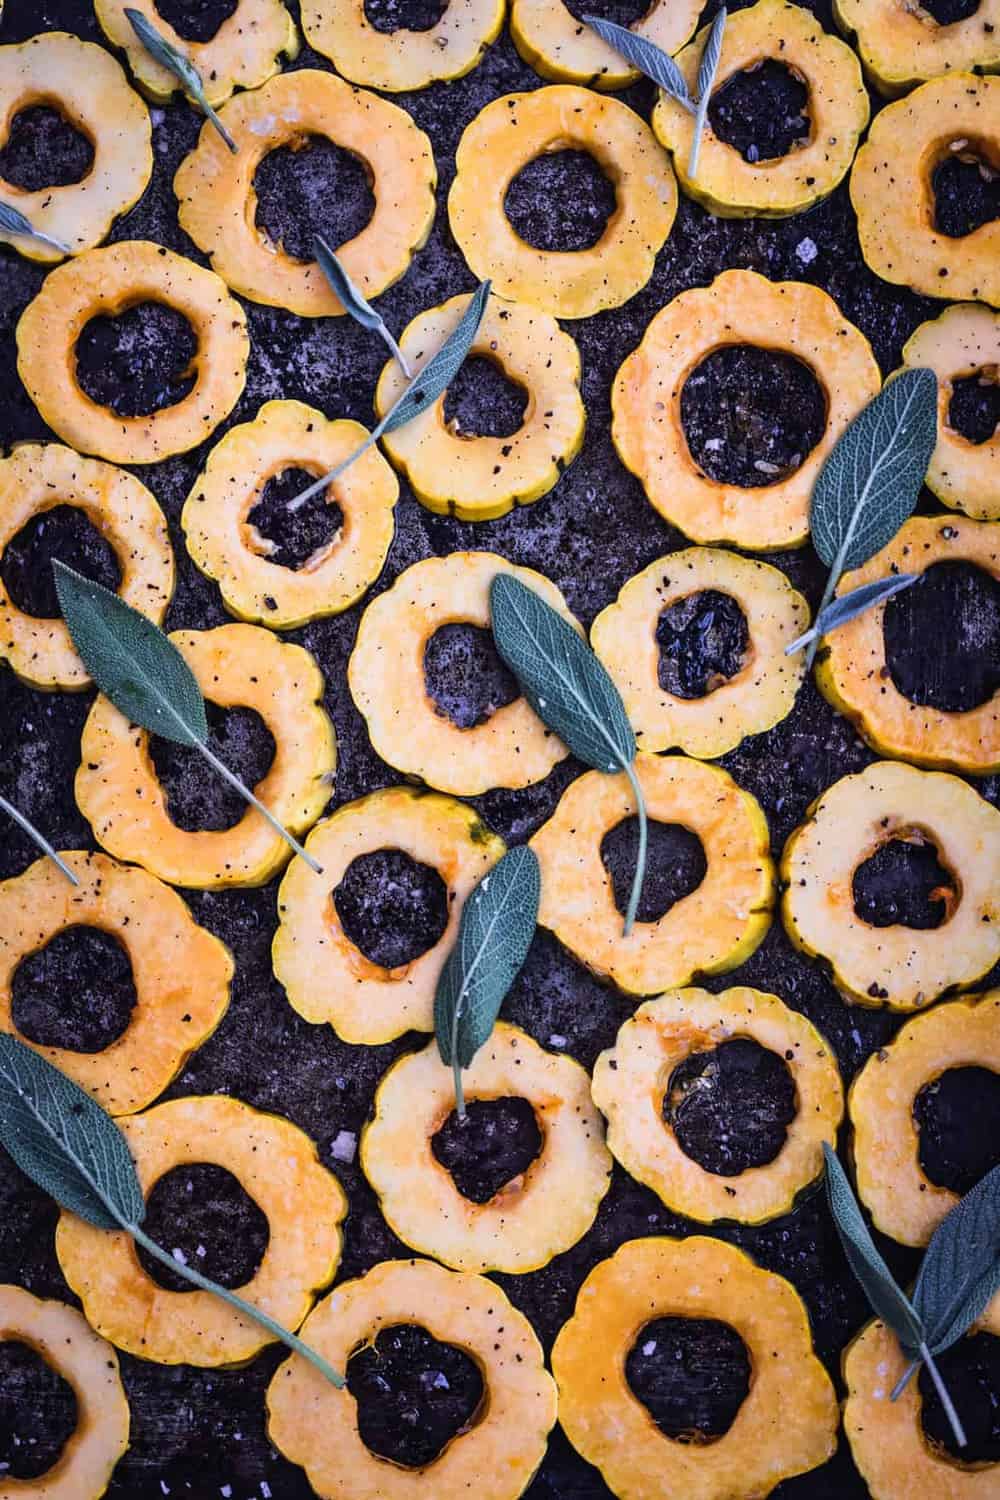 Sliced roasted squash rings on baking sheet, up close, topped with fresh sage leaves. Pre Oven.